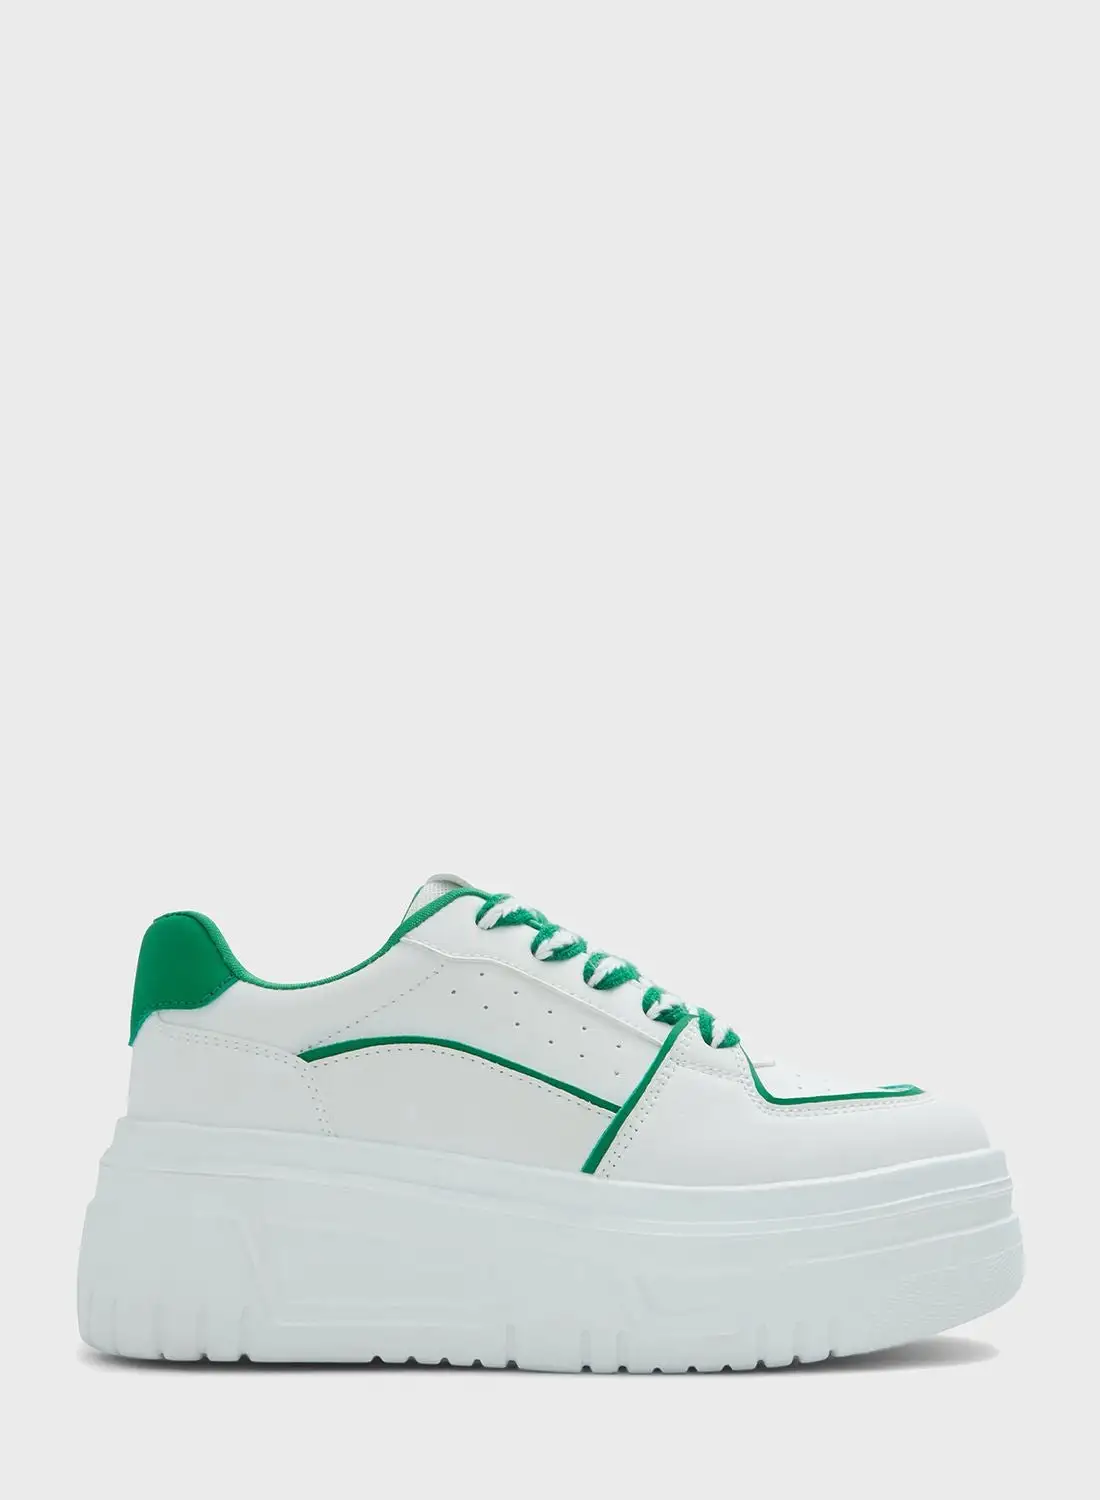 CALL IT SPRING Embery Low-Top Sneakers